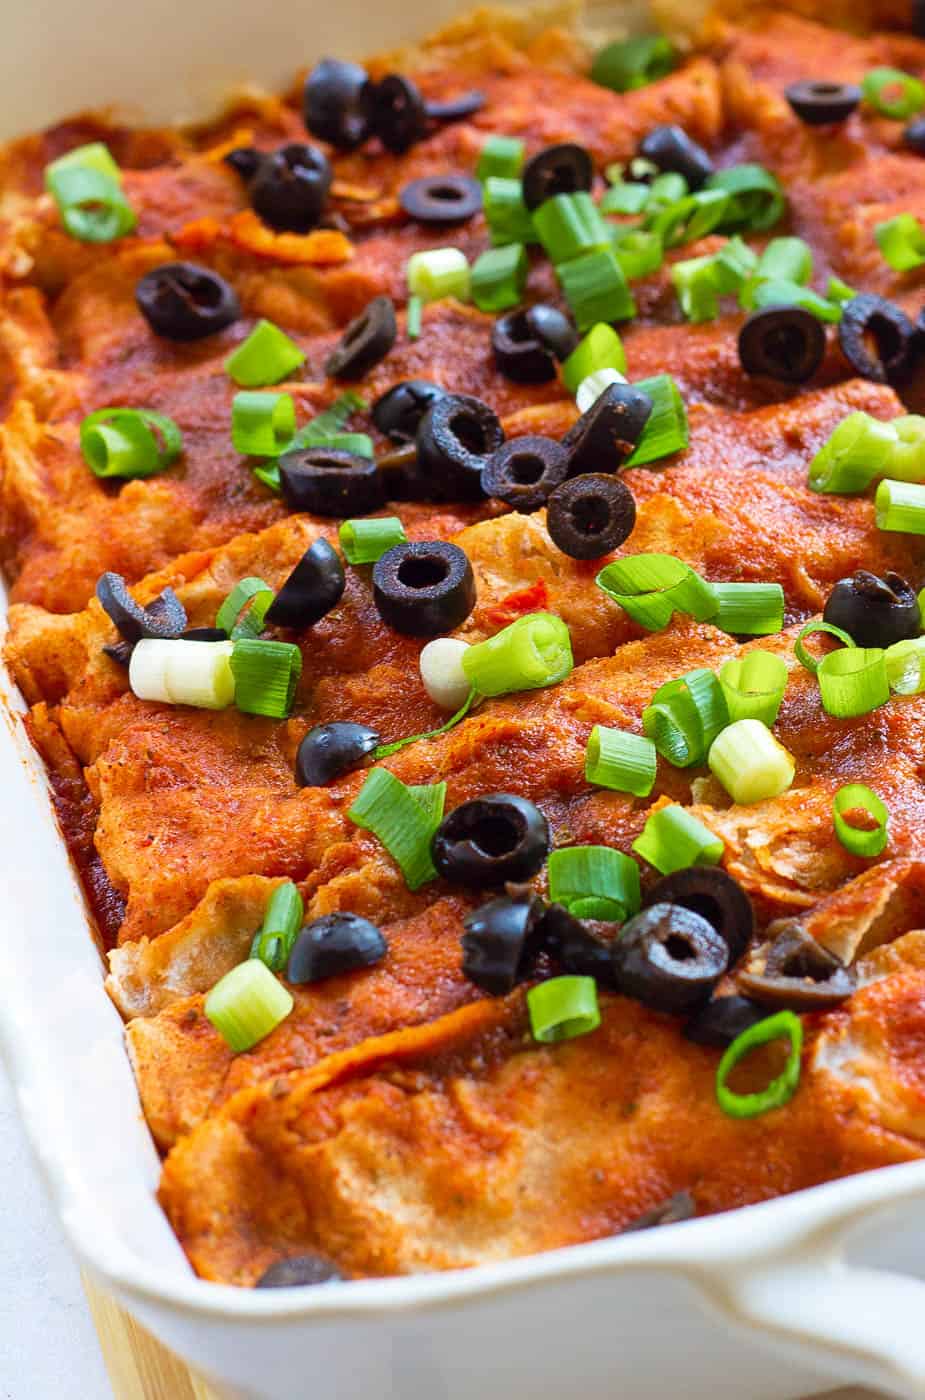 vegan enchiladas, fresh out of the oven, served in a casserole dish and topped with green onions and olives